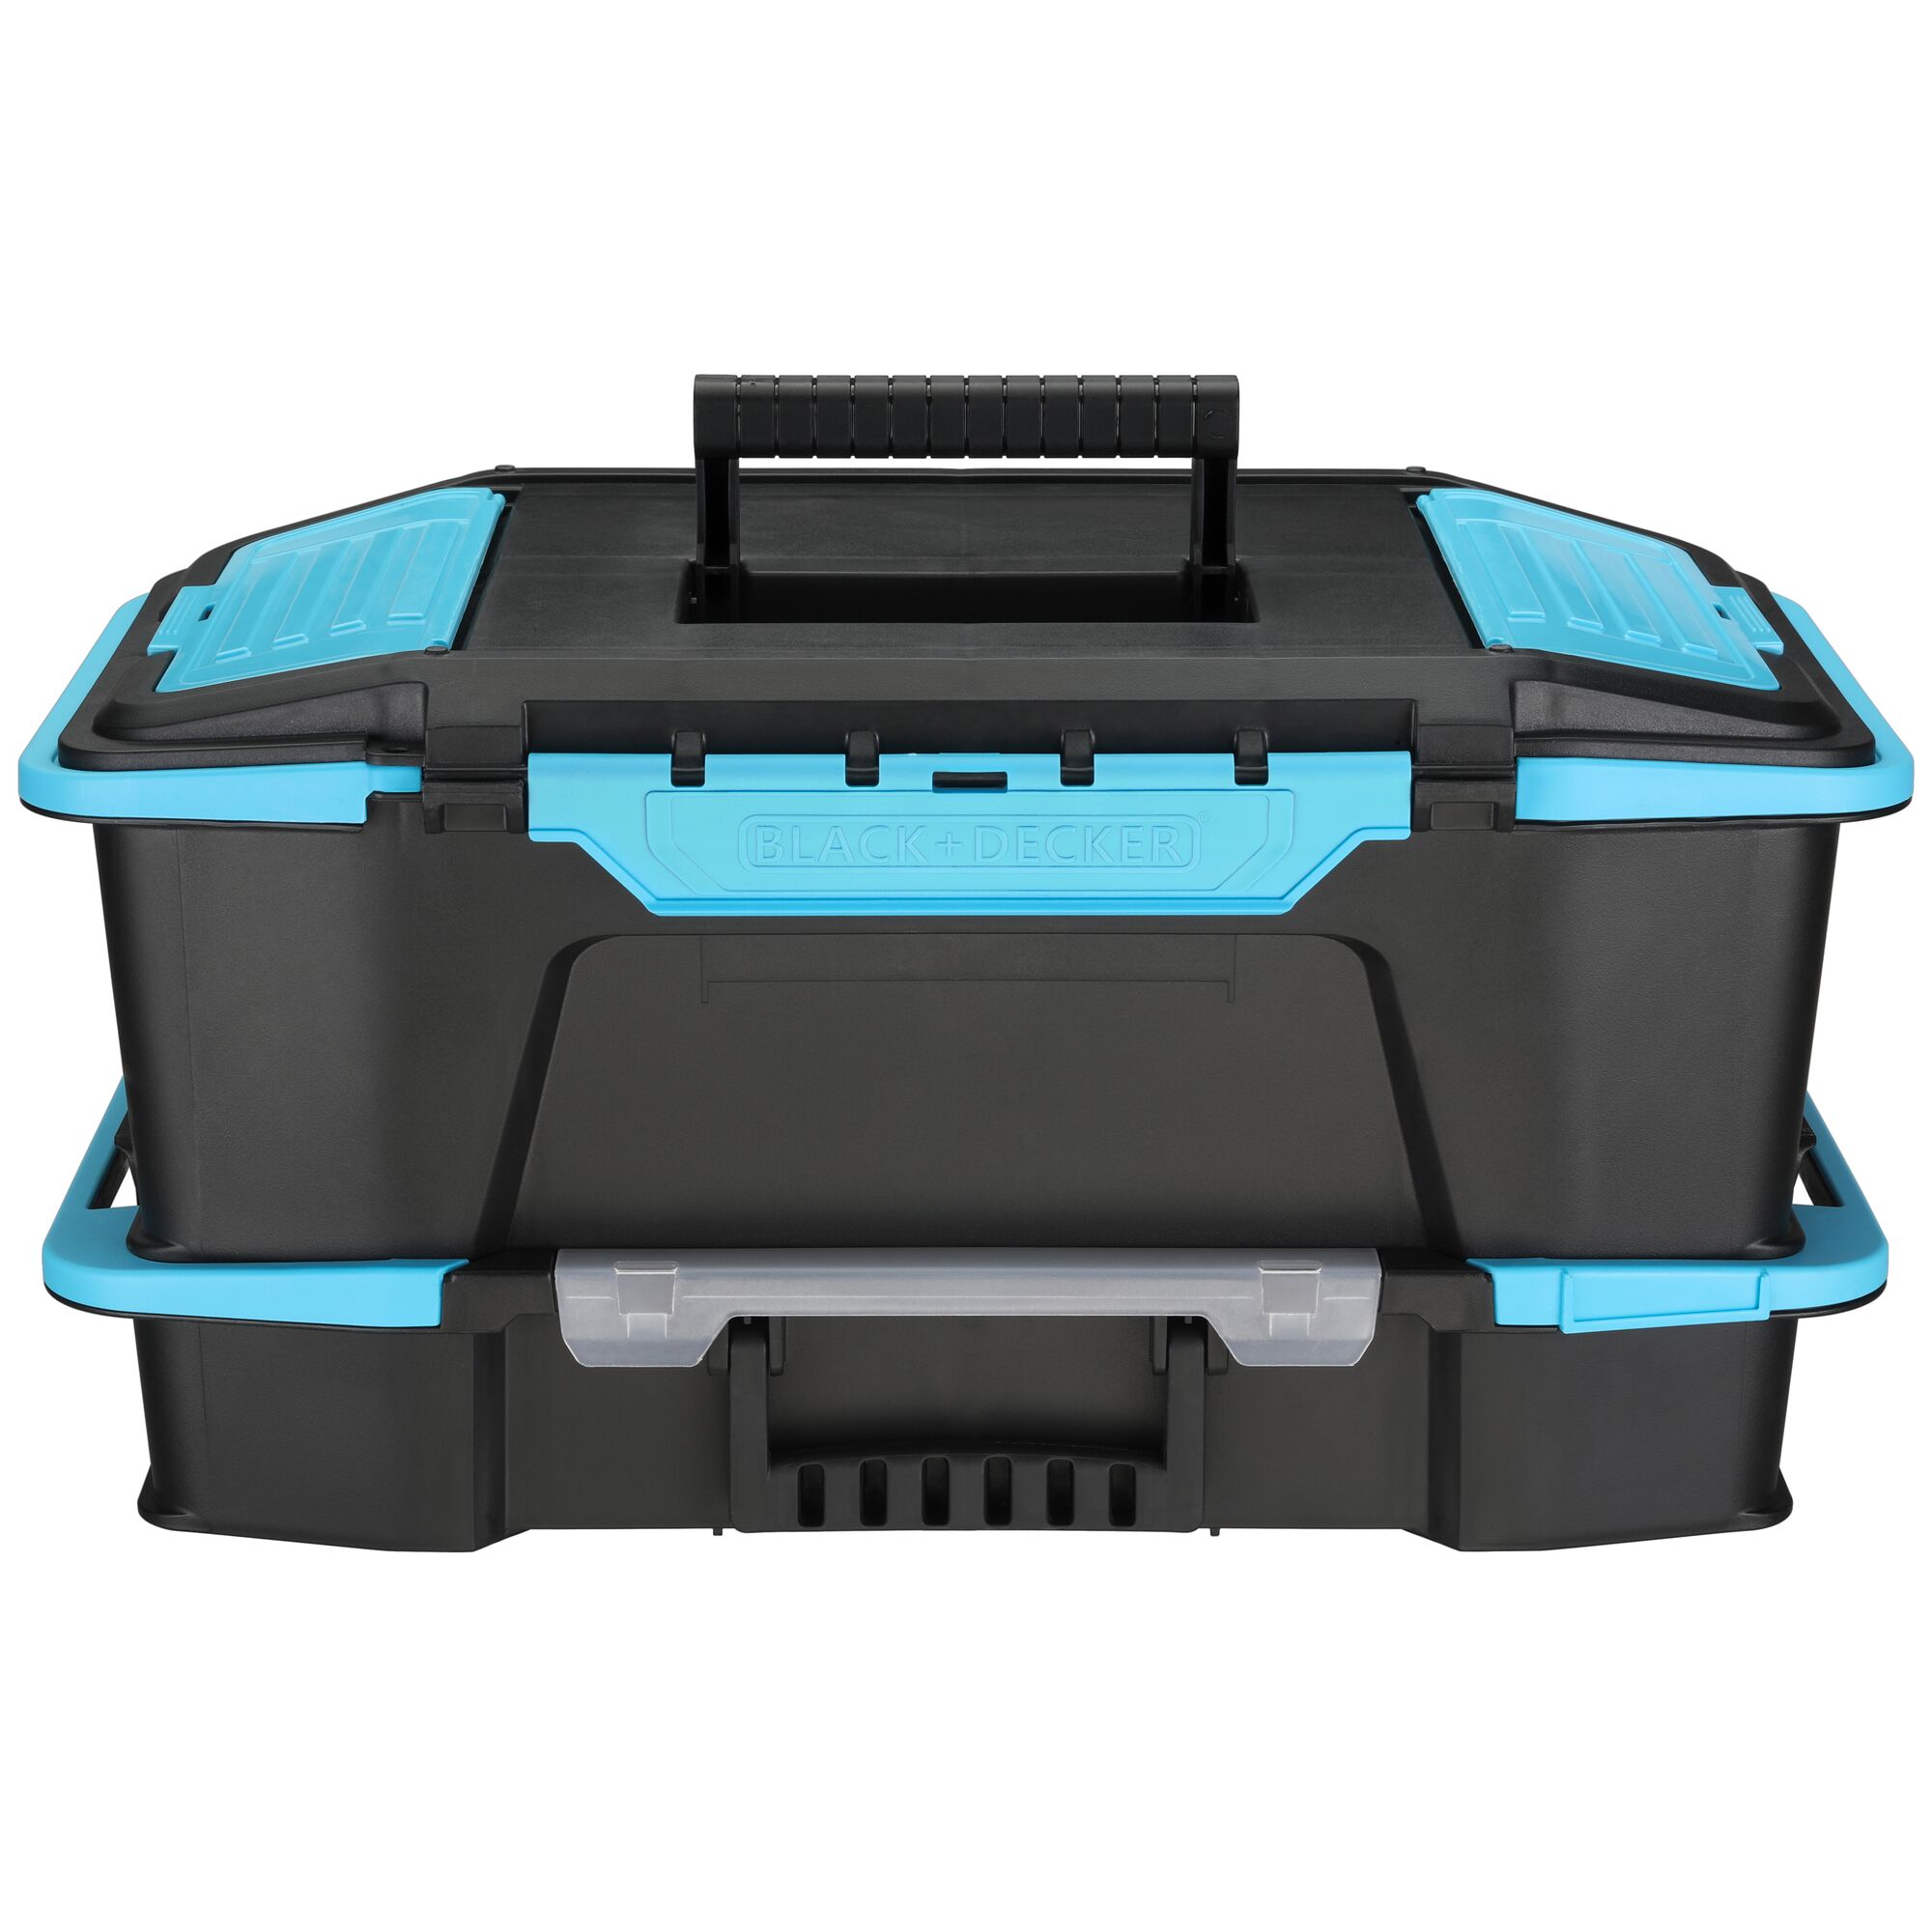 Front facing view of Black and decker 19” Stackable Caddy And Organizer